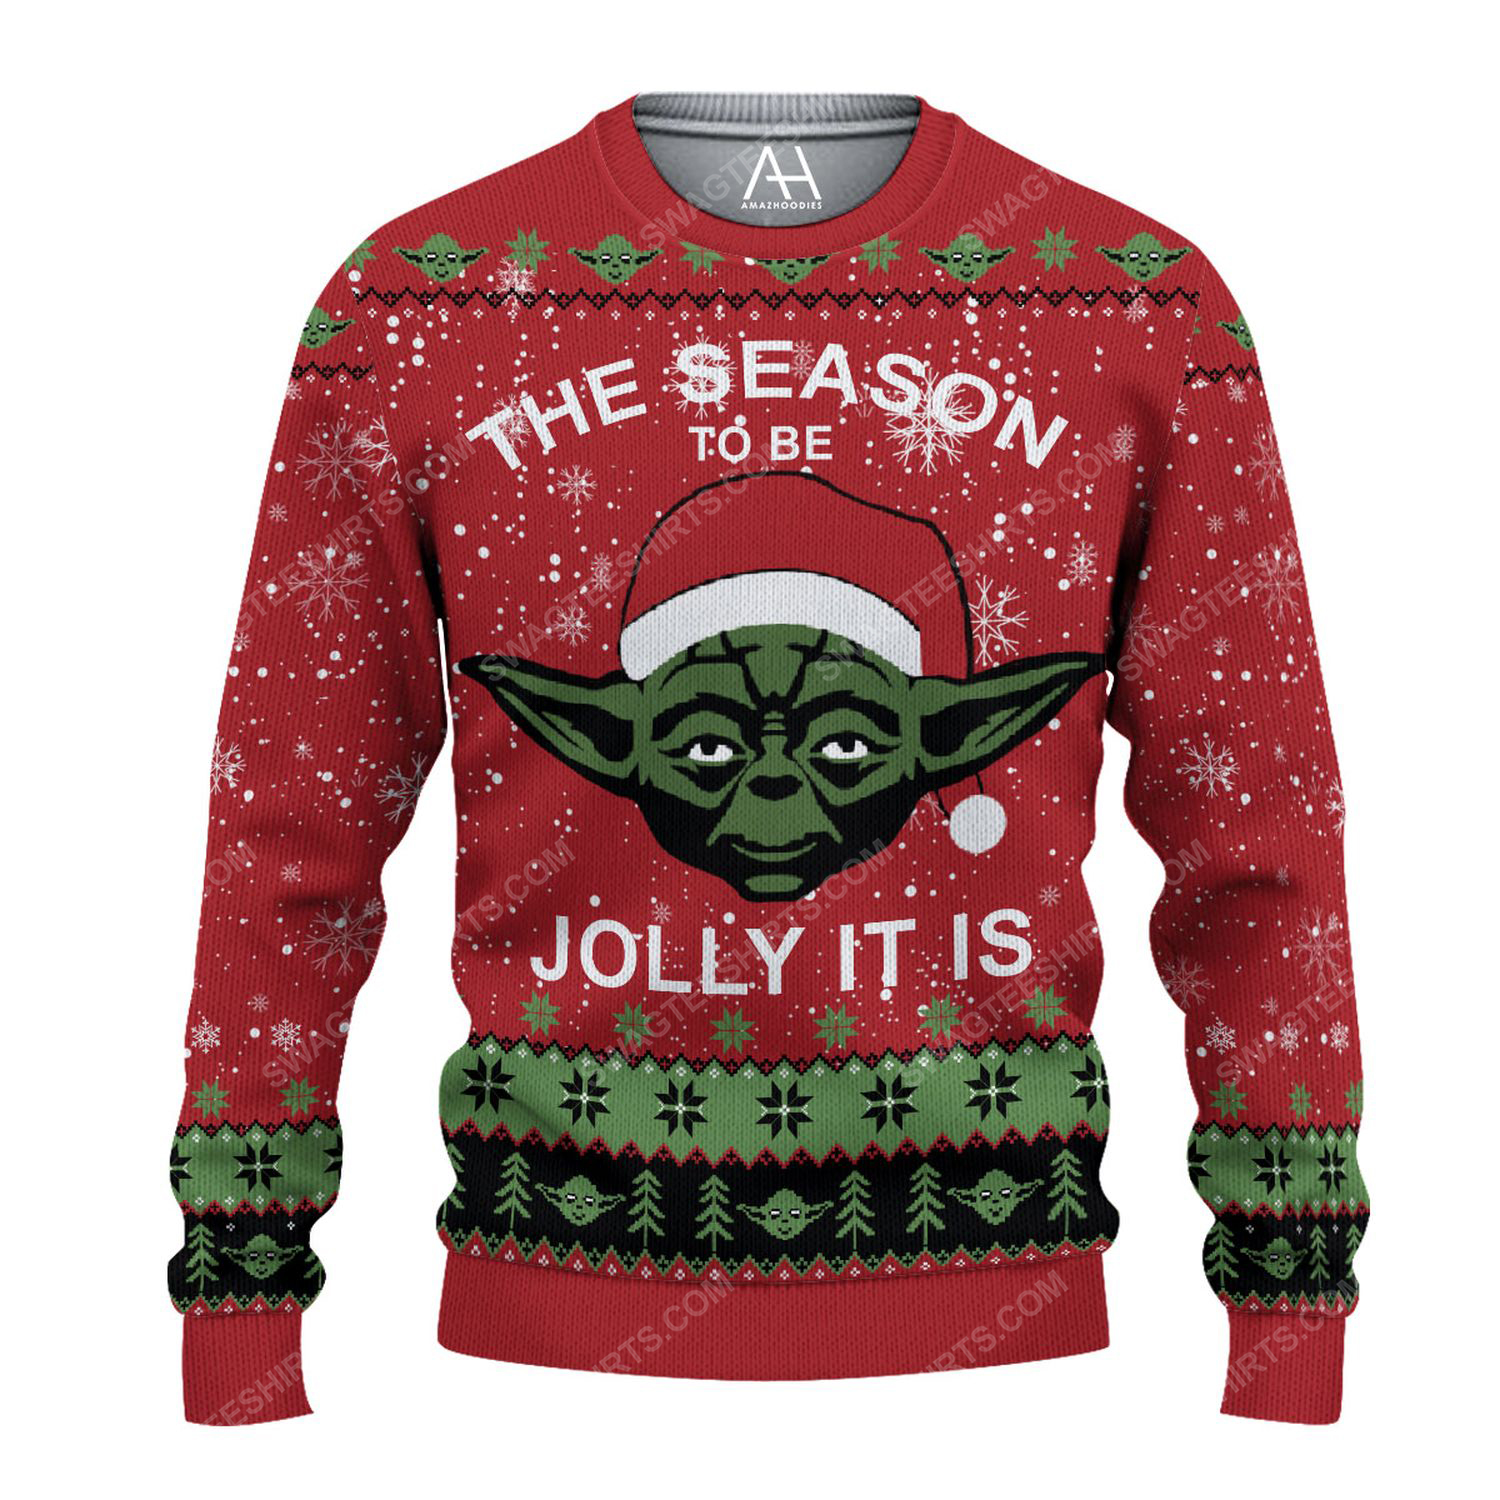 The season to be jolly it is yoda ugly christmas sweater 1 - Copy (3)